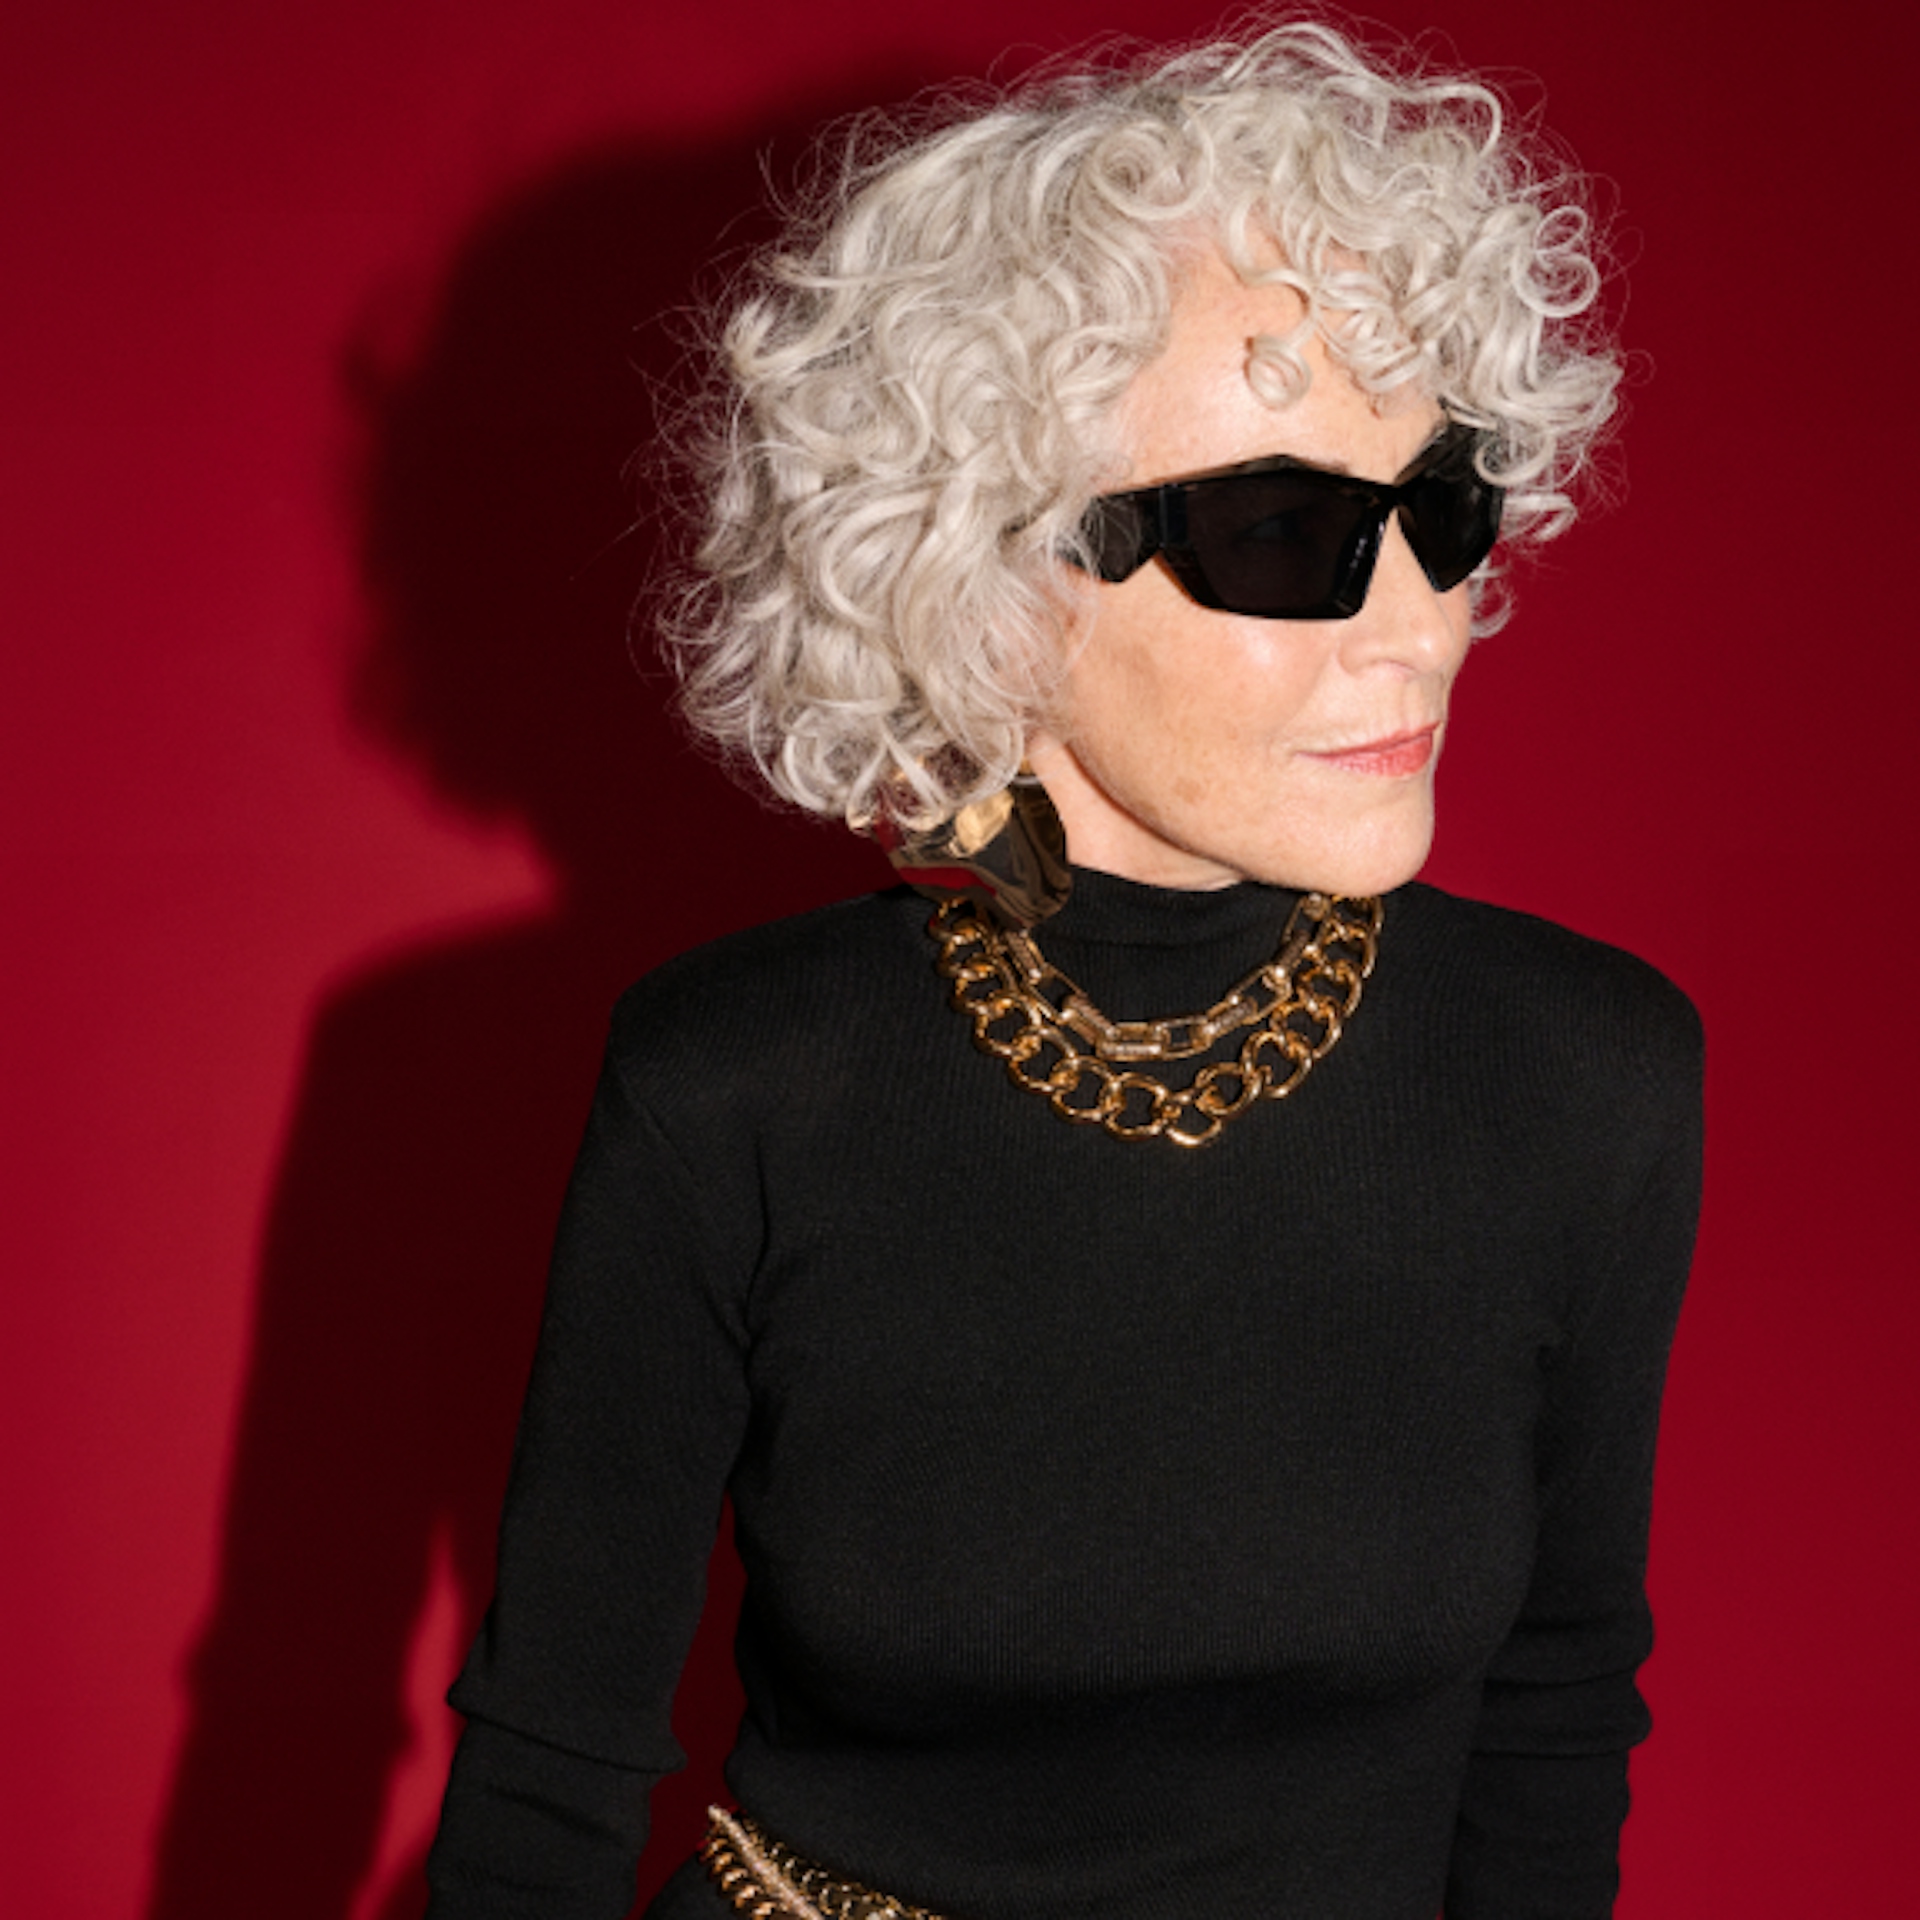 The image shows an older woman with curly white hair, wearing large black sunglasses and a fitted black turtleneck. She accessorizes with bold chunky chain necklaces and oversized earrings. The background is a solid deep red, highlighting her stylish, sophisticated appearance.